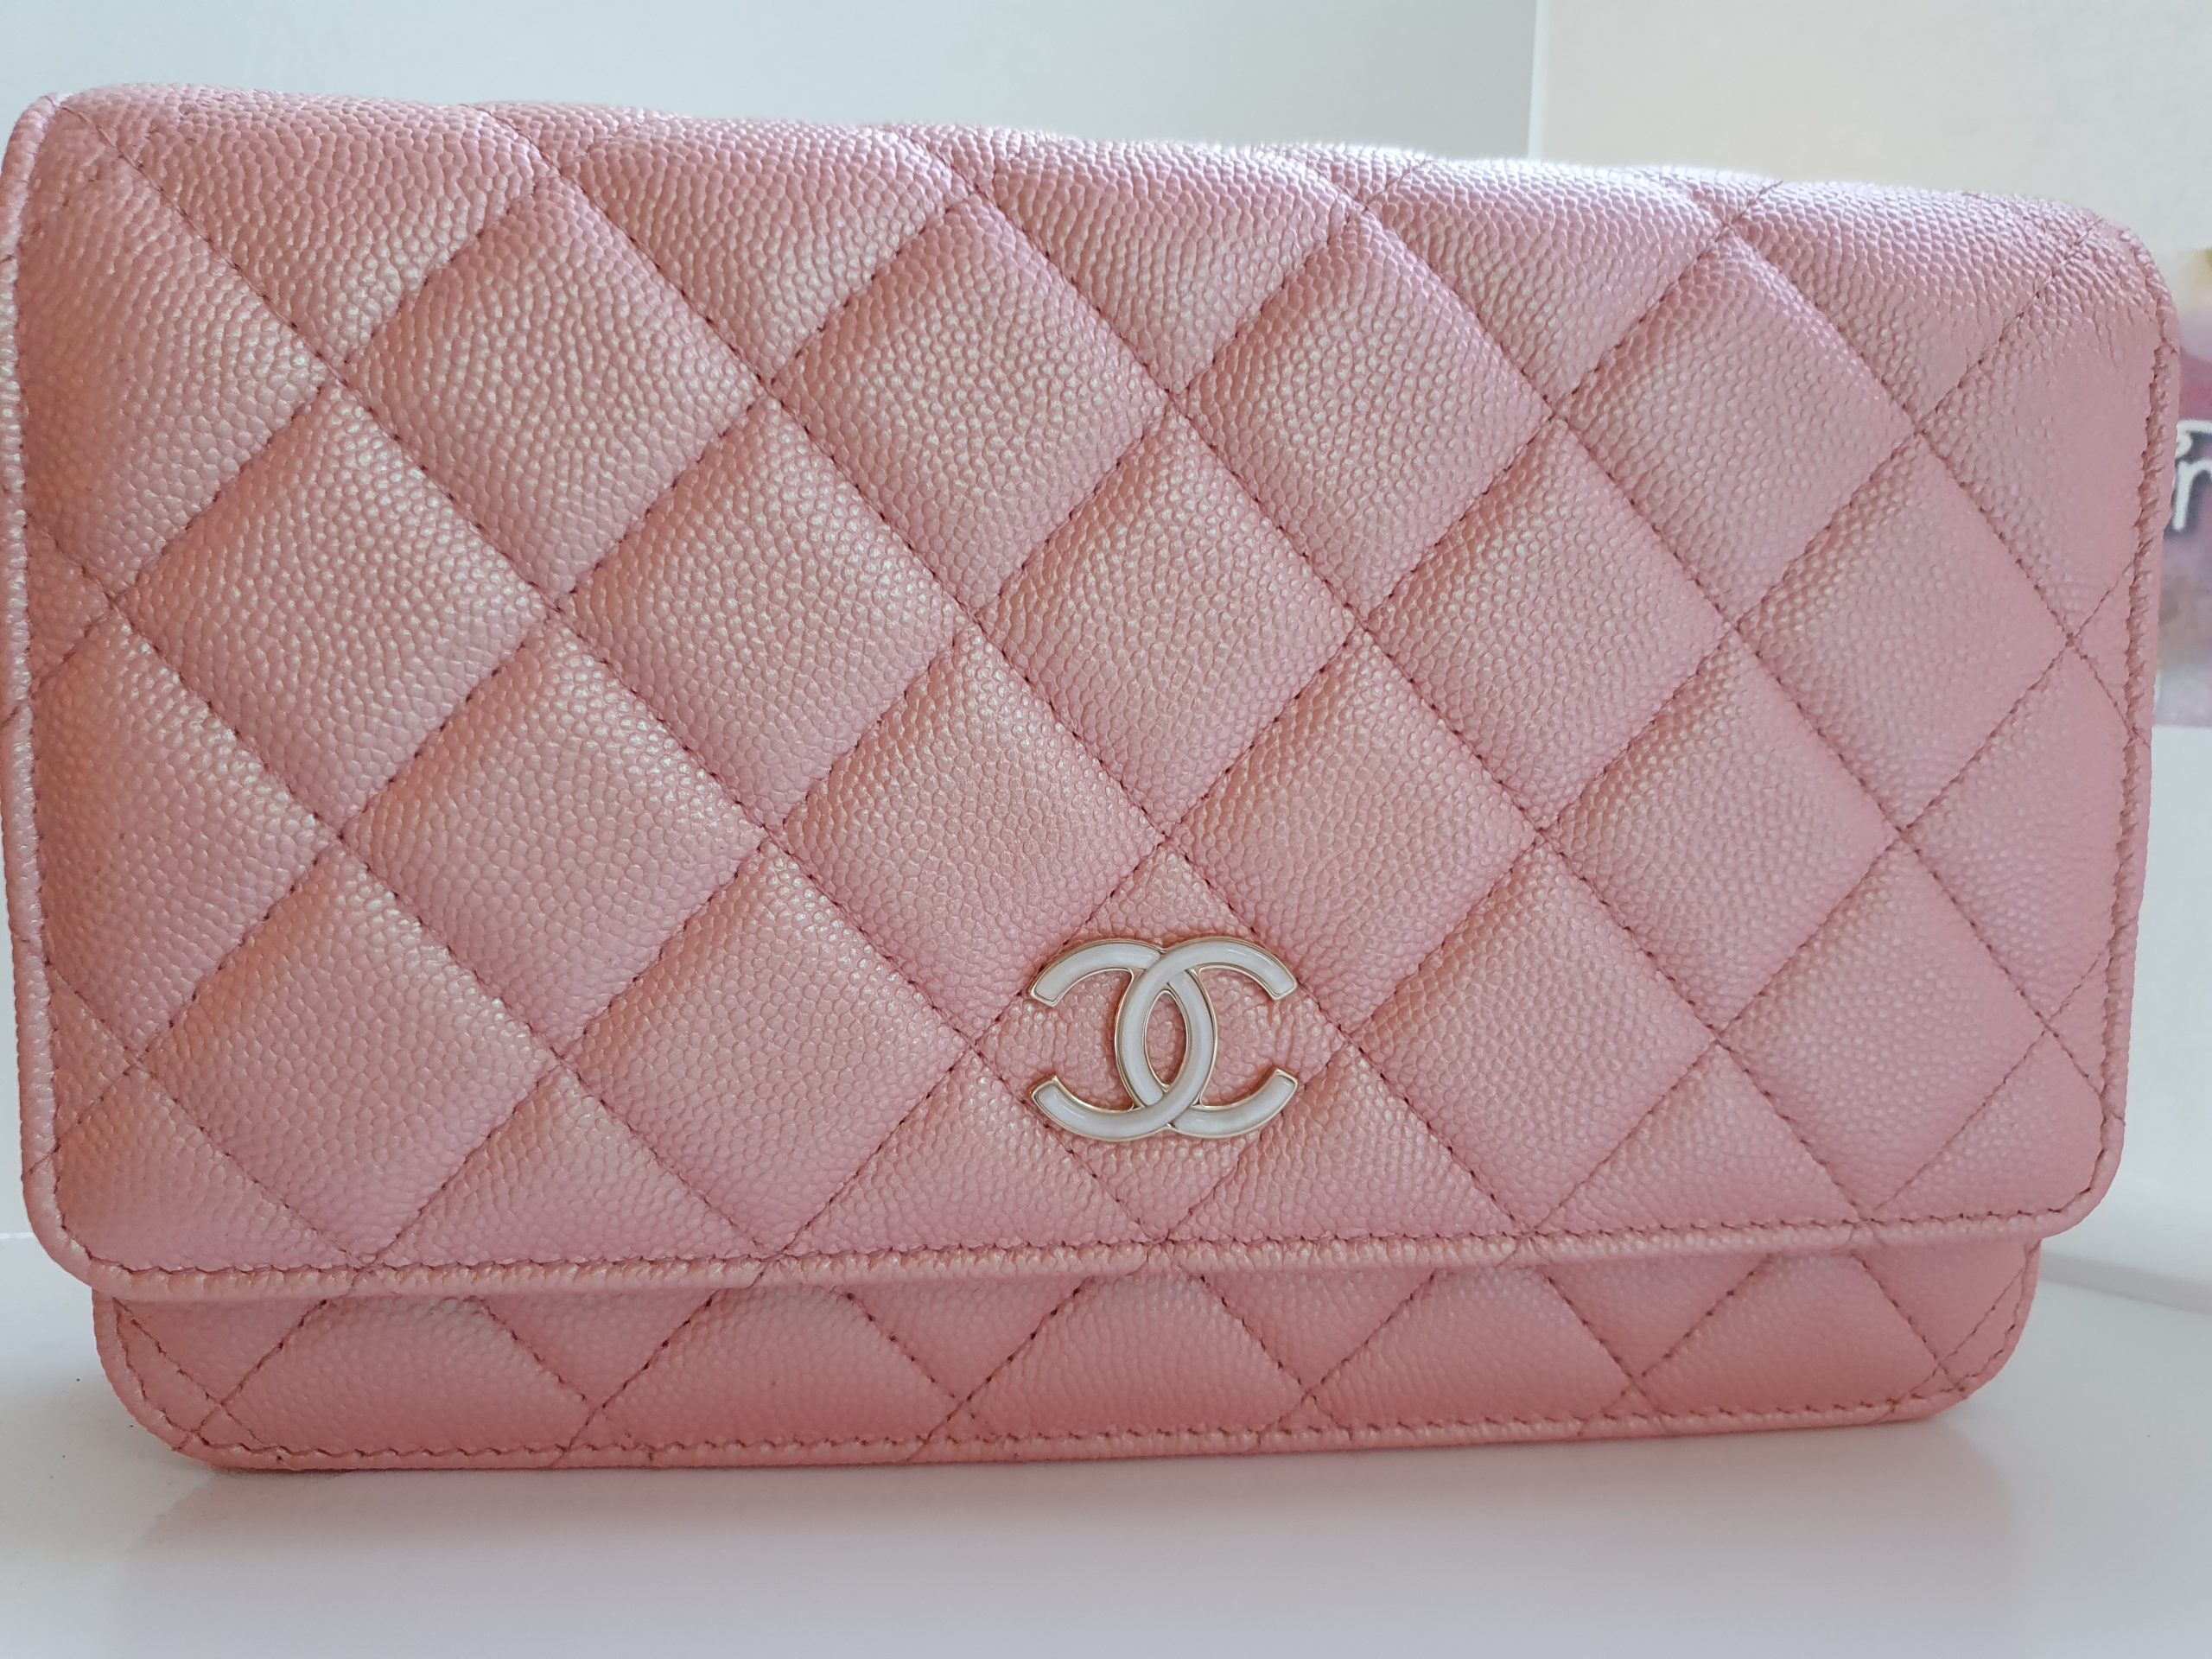 Chanel 19S Iridescent Pink Wallet on Chain Bag - Seeking Perfect Purchase